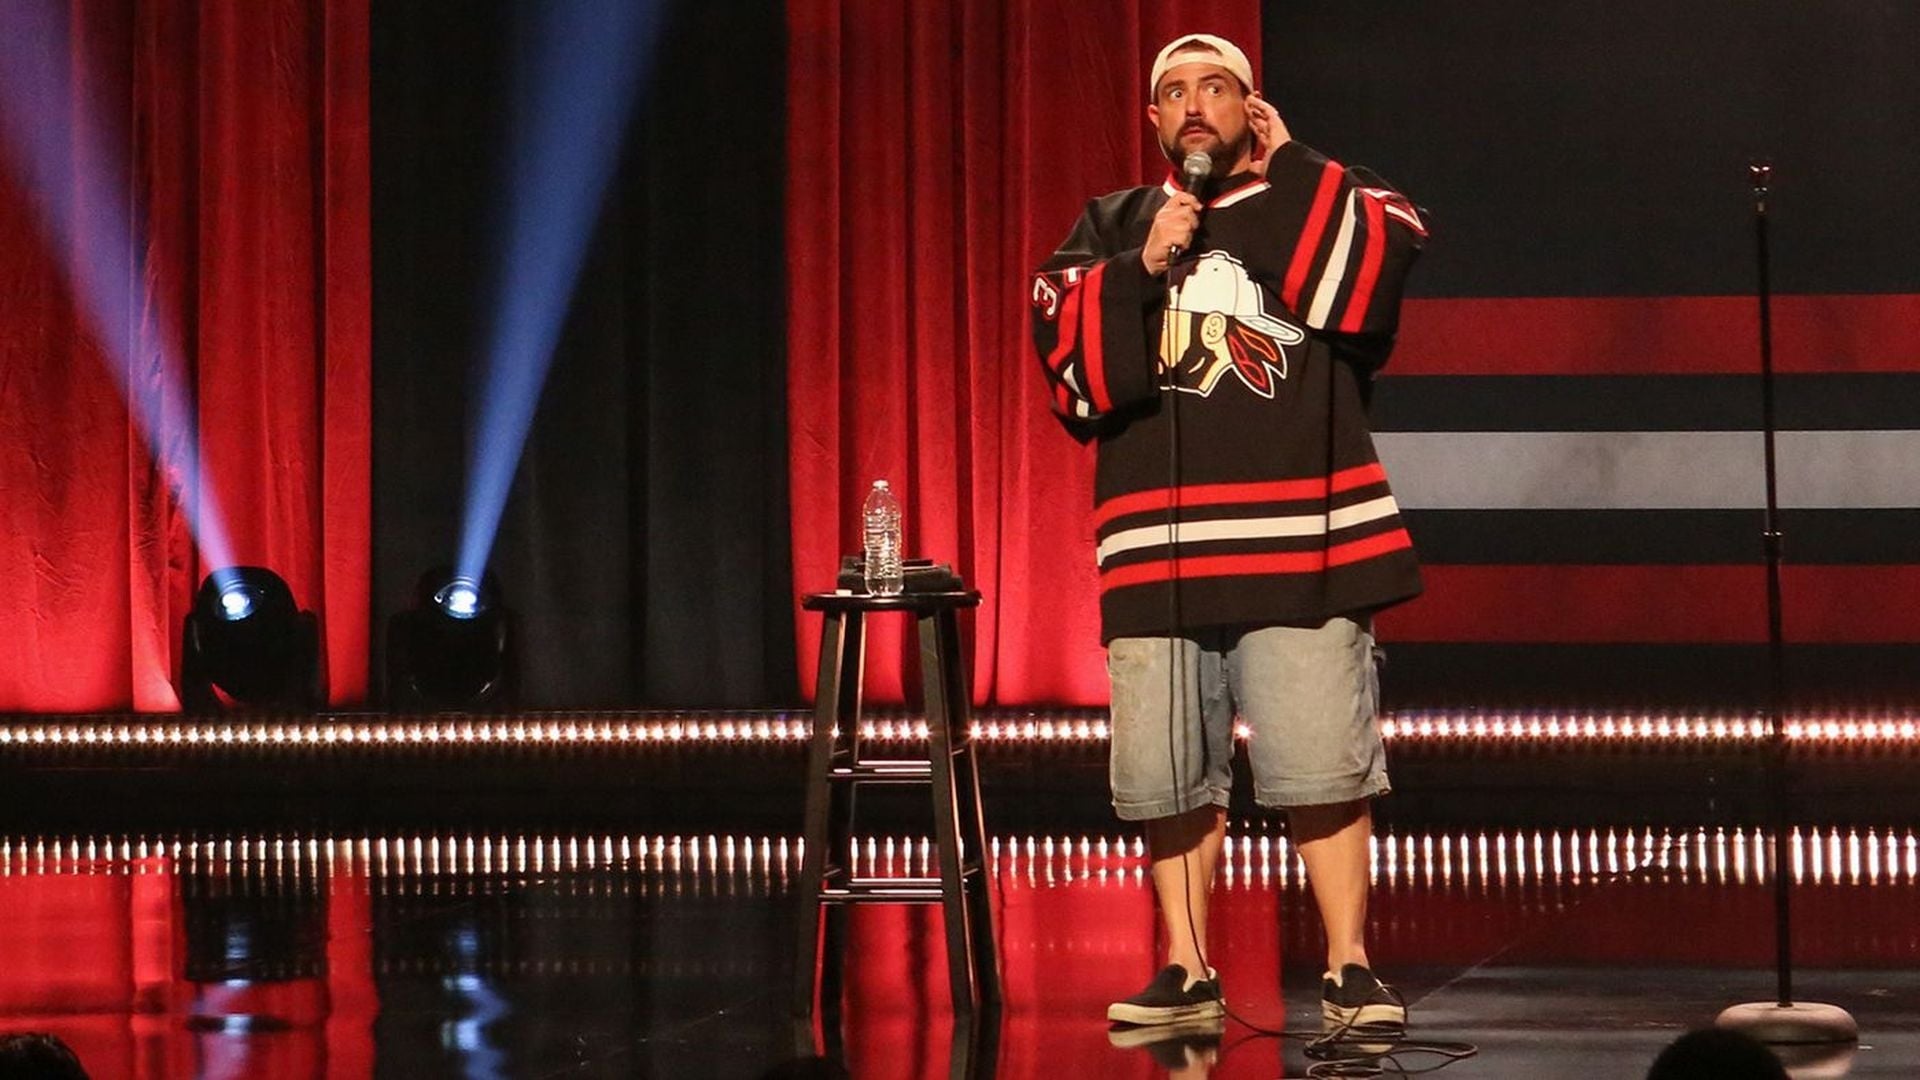 Kevin Smith: Silent But Deadly